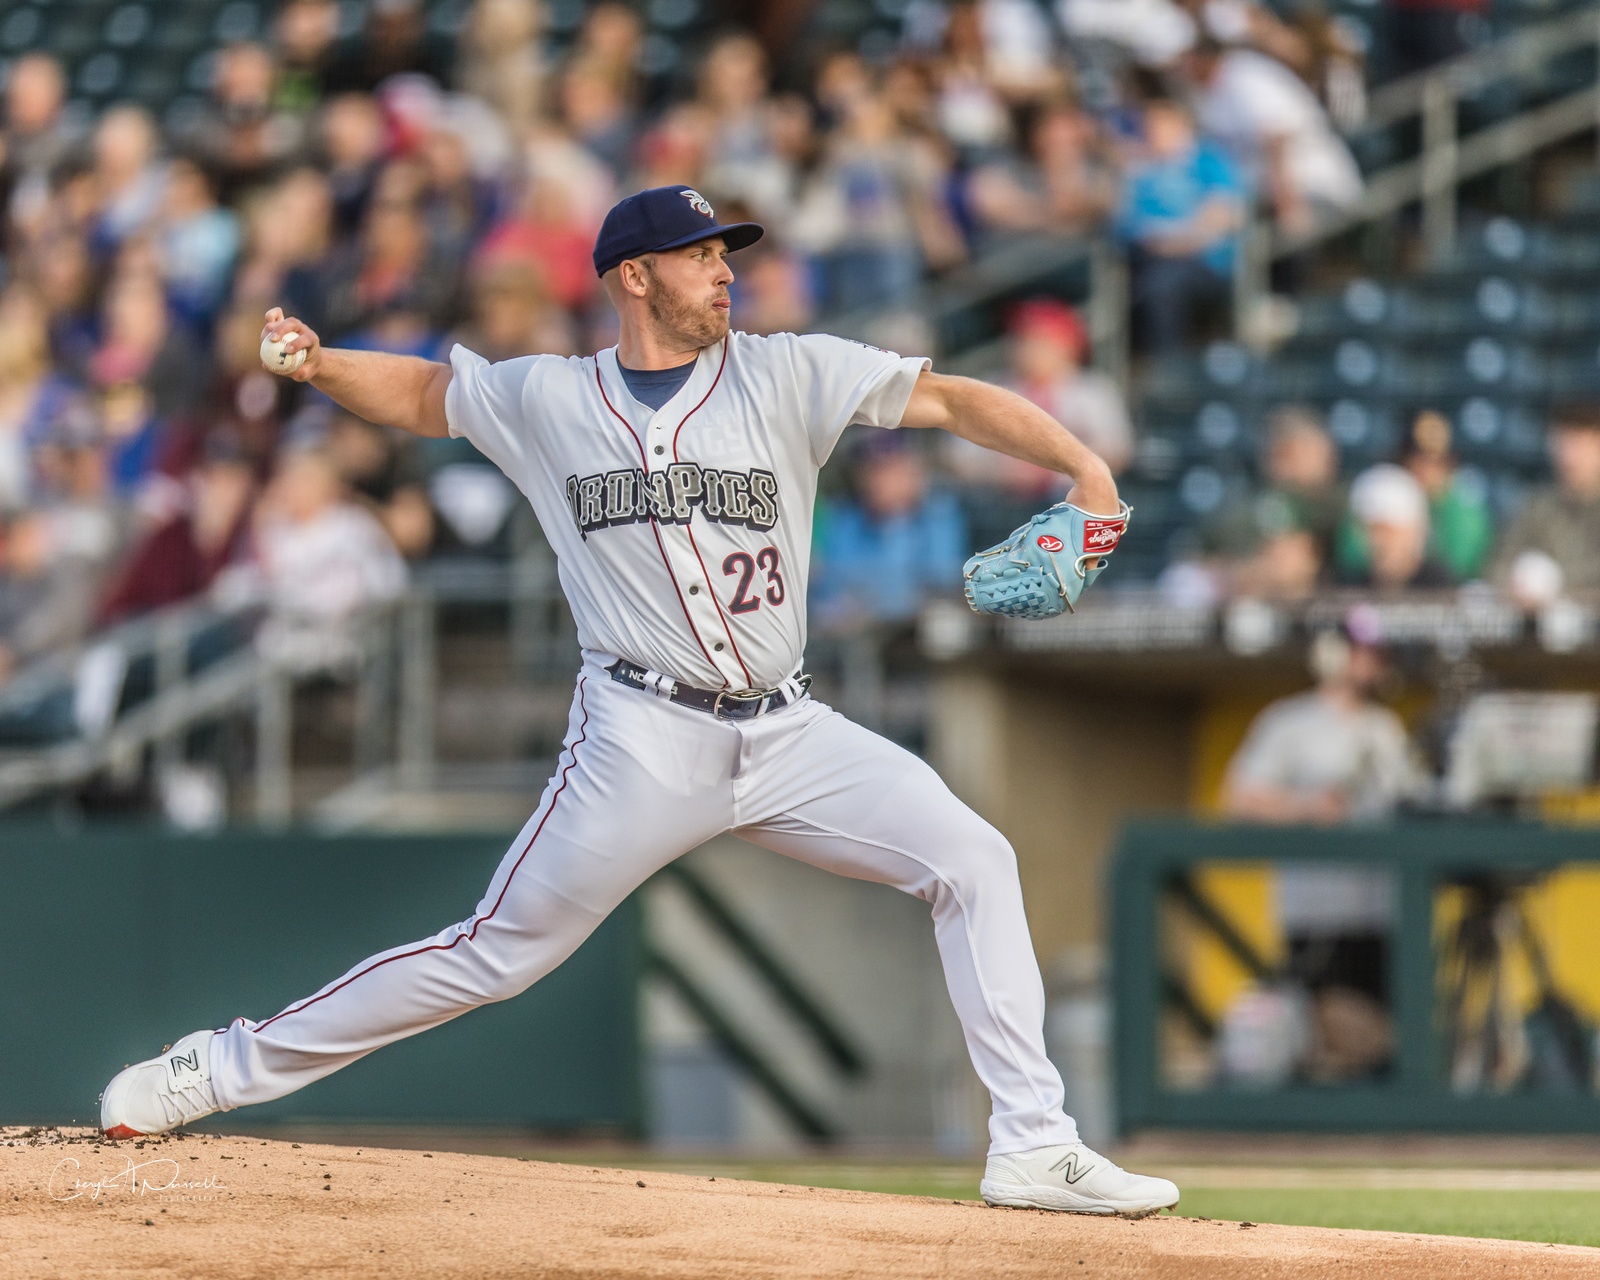 IronPigs: Weston Wilson prepared, blessed for opportunity with